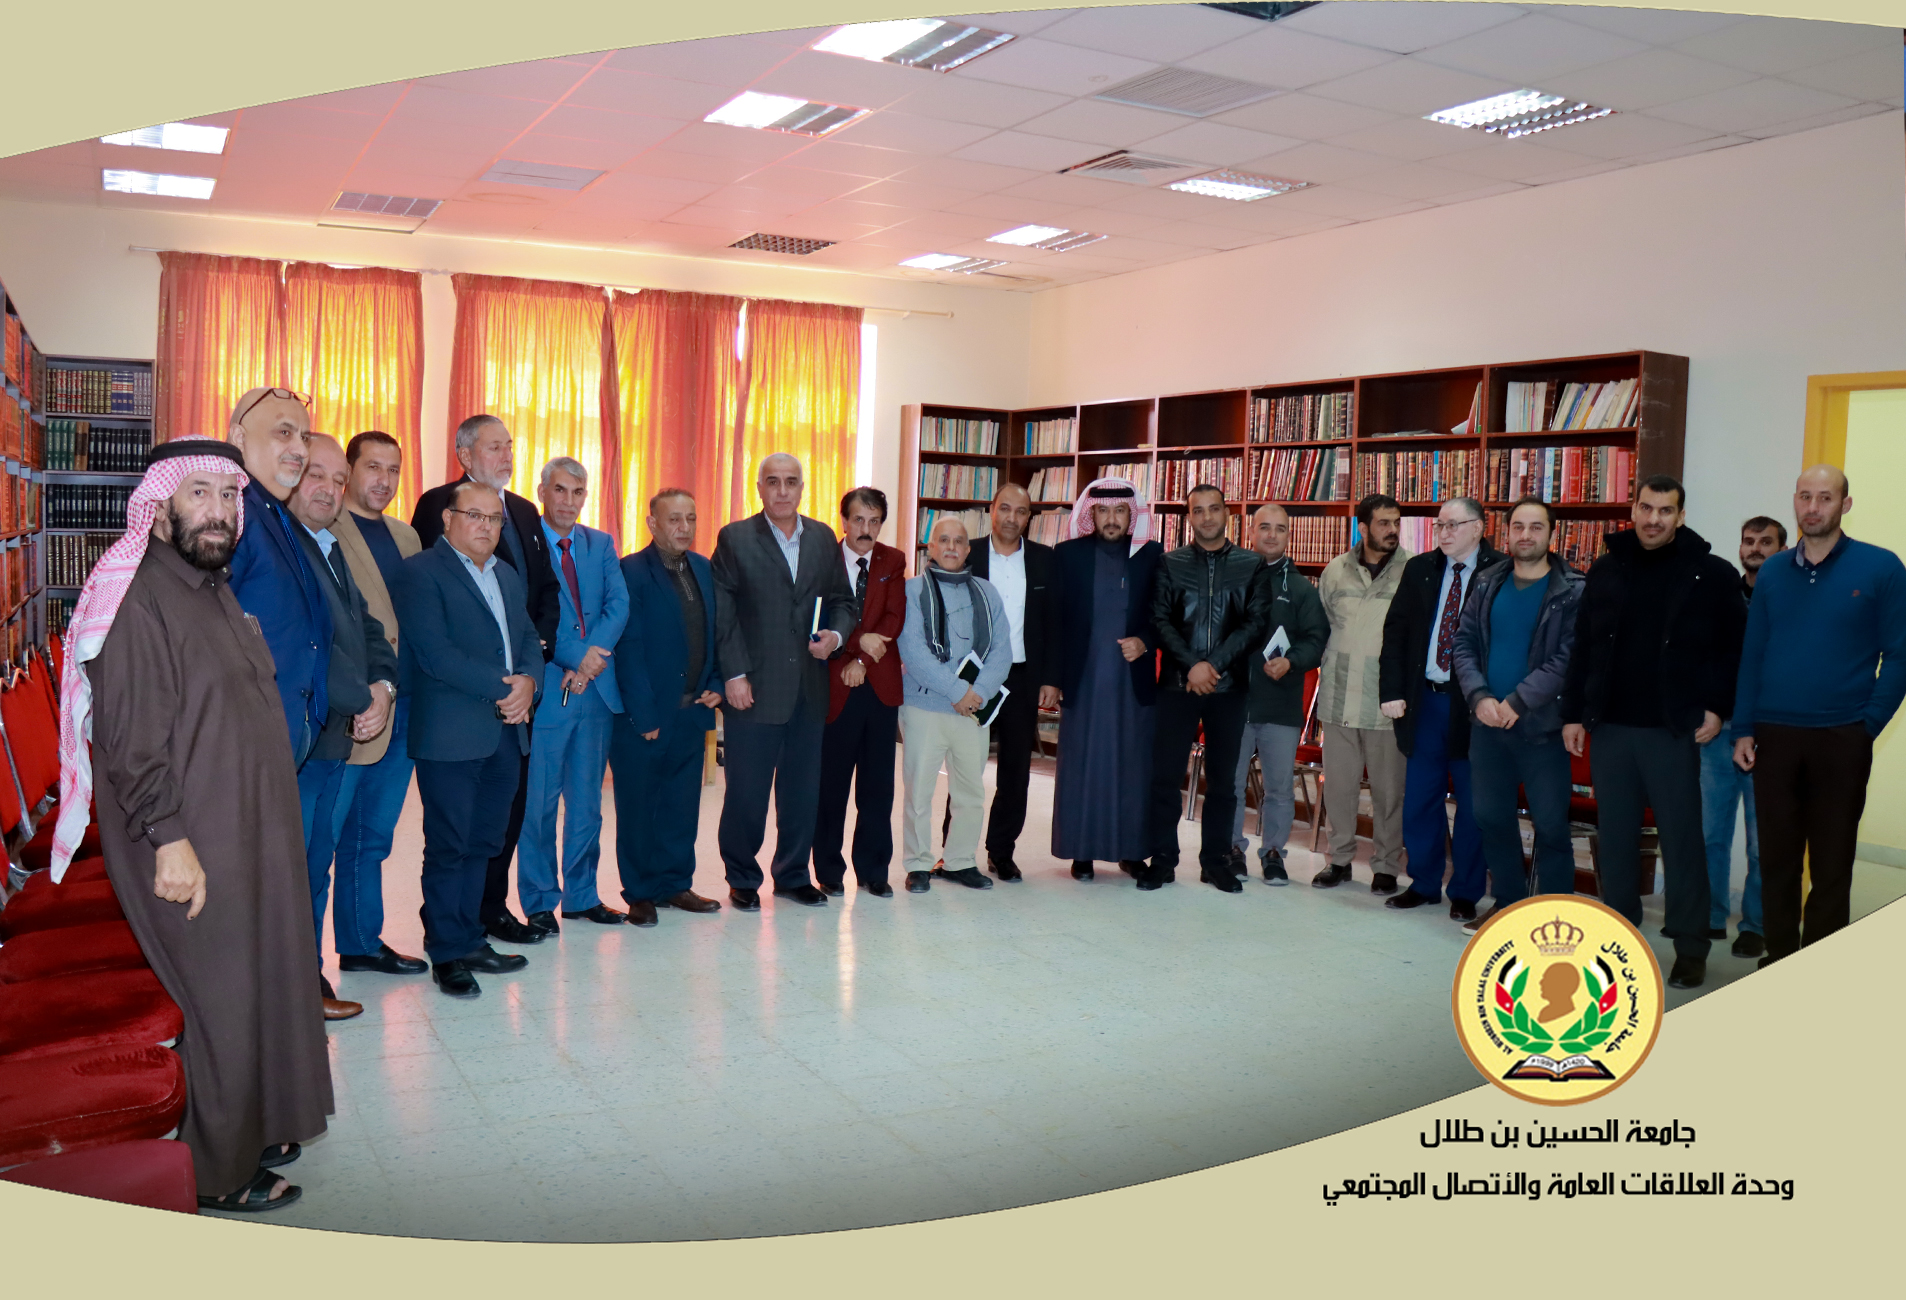 The president of the university meets the faculty of the Faculty of Arts.